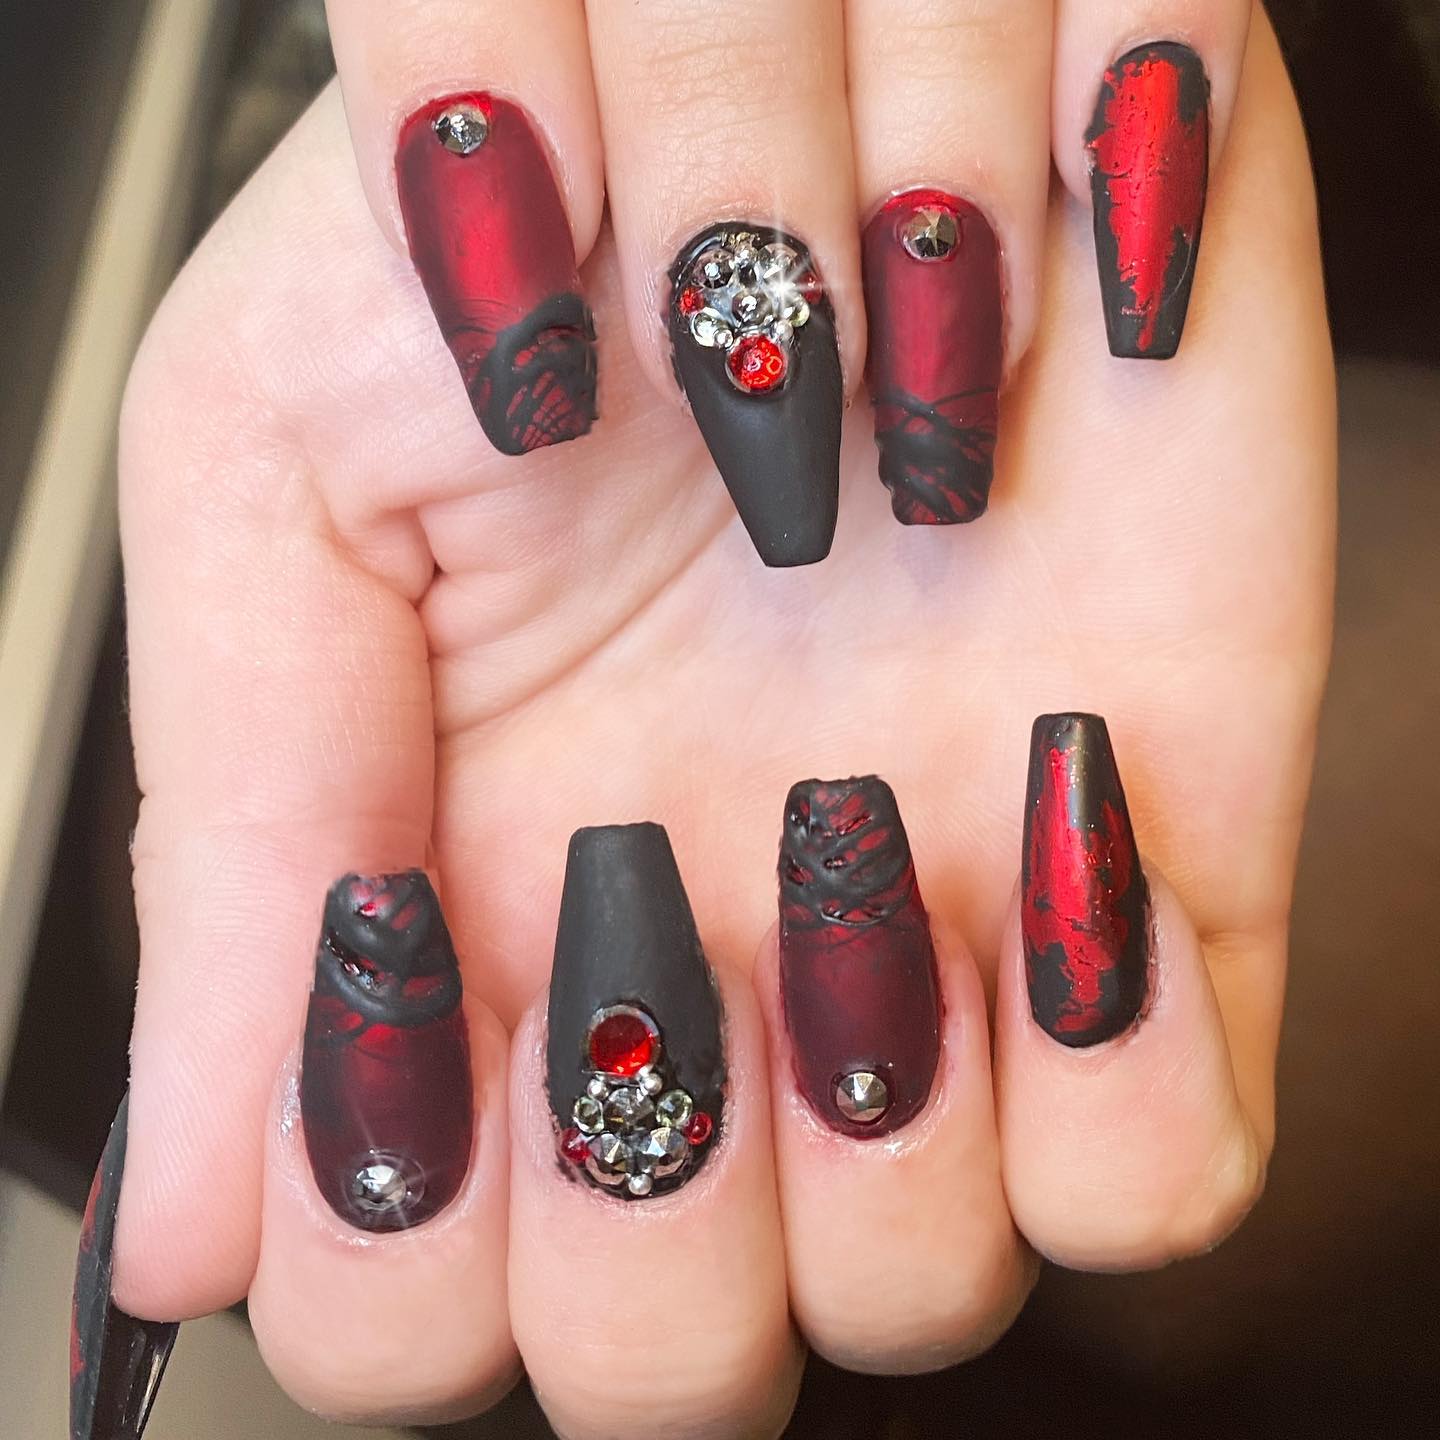 Are you ready to be gothic? Especially for special occassions like Halloween, this nail design is perfect. The matte black and red nails offer a gothic look with shiny stones on them. Let's feel Gothicism to its fullest.